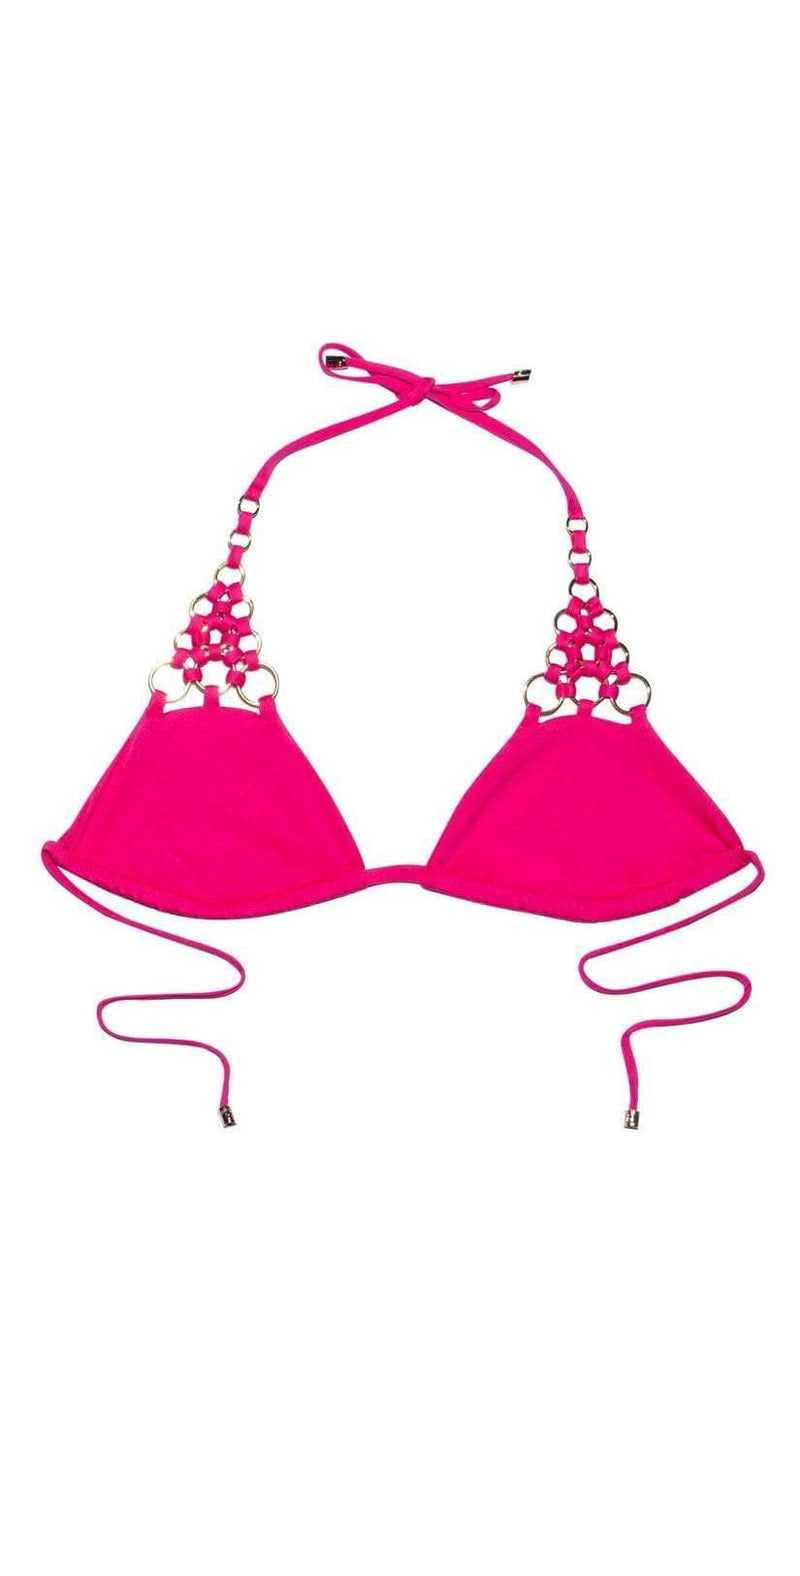 Beach Bunny Ireland Ring Tri Top In Pink B18127T2 BARB: